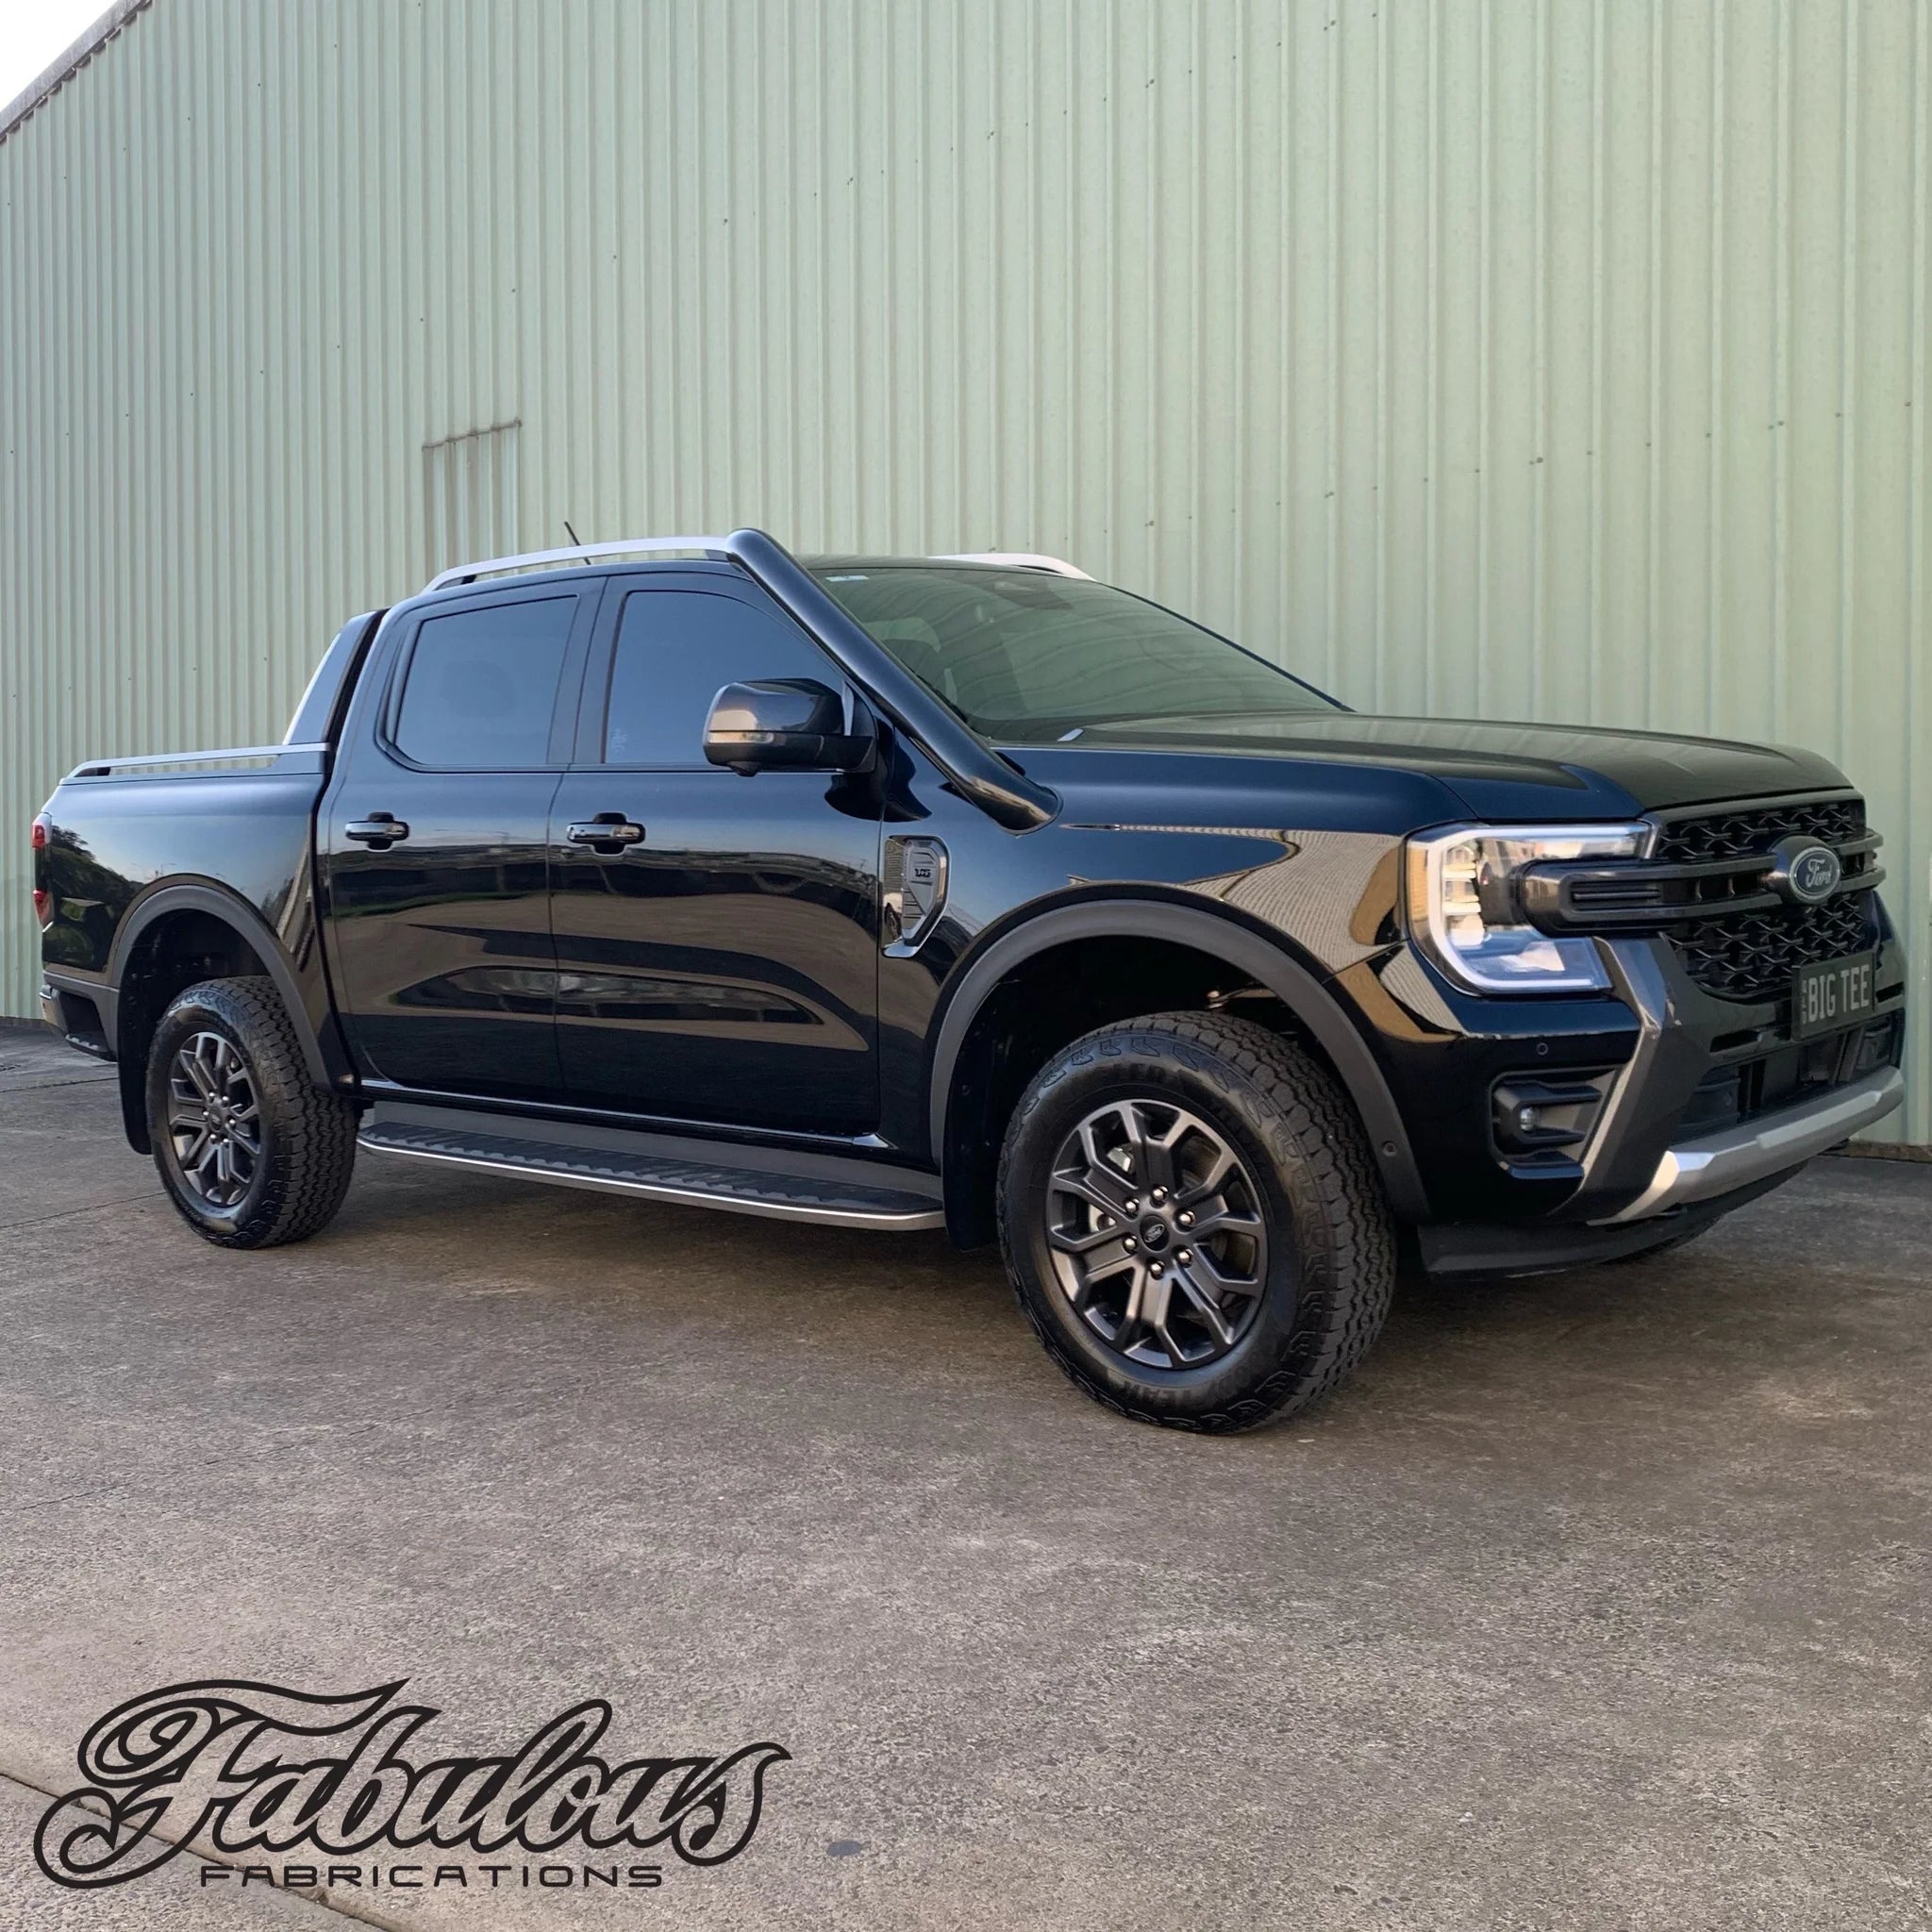 Ford Ranger Next Gen 4 Inch Short Entry Stainless Snorkel and Alloy Washer Bottle Kit